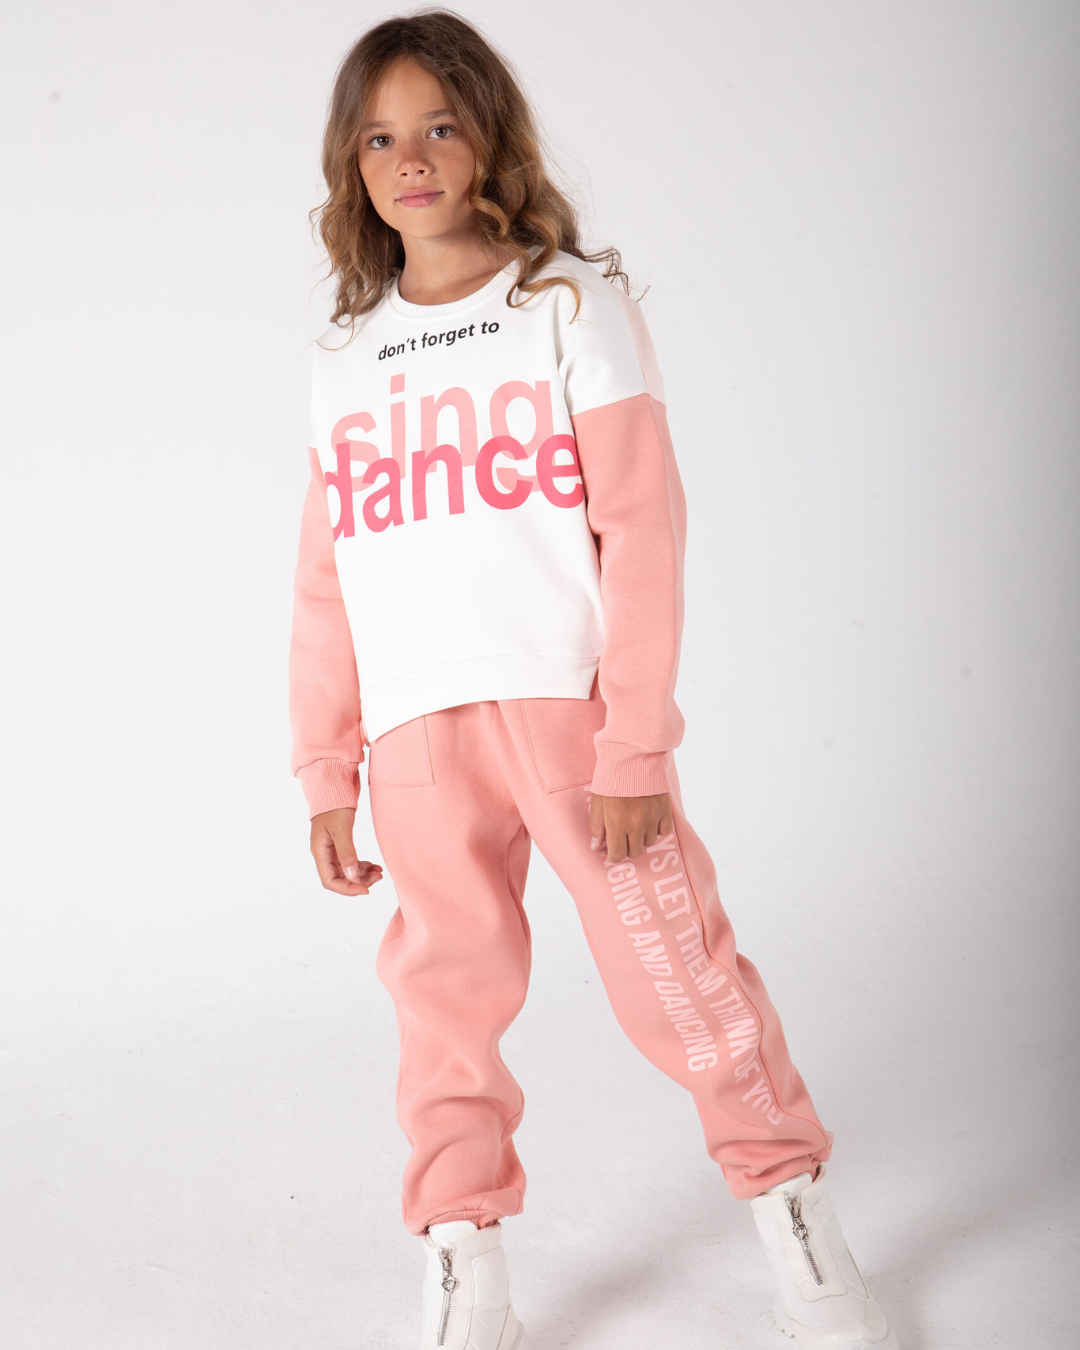 Don't forget to dance. Girls' pajamas